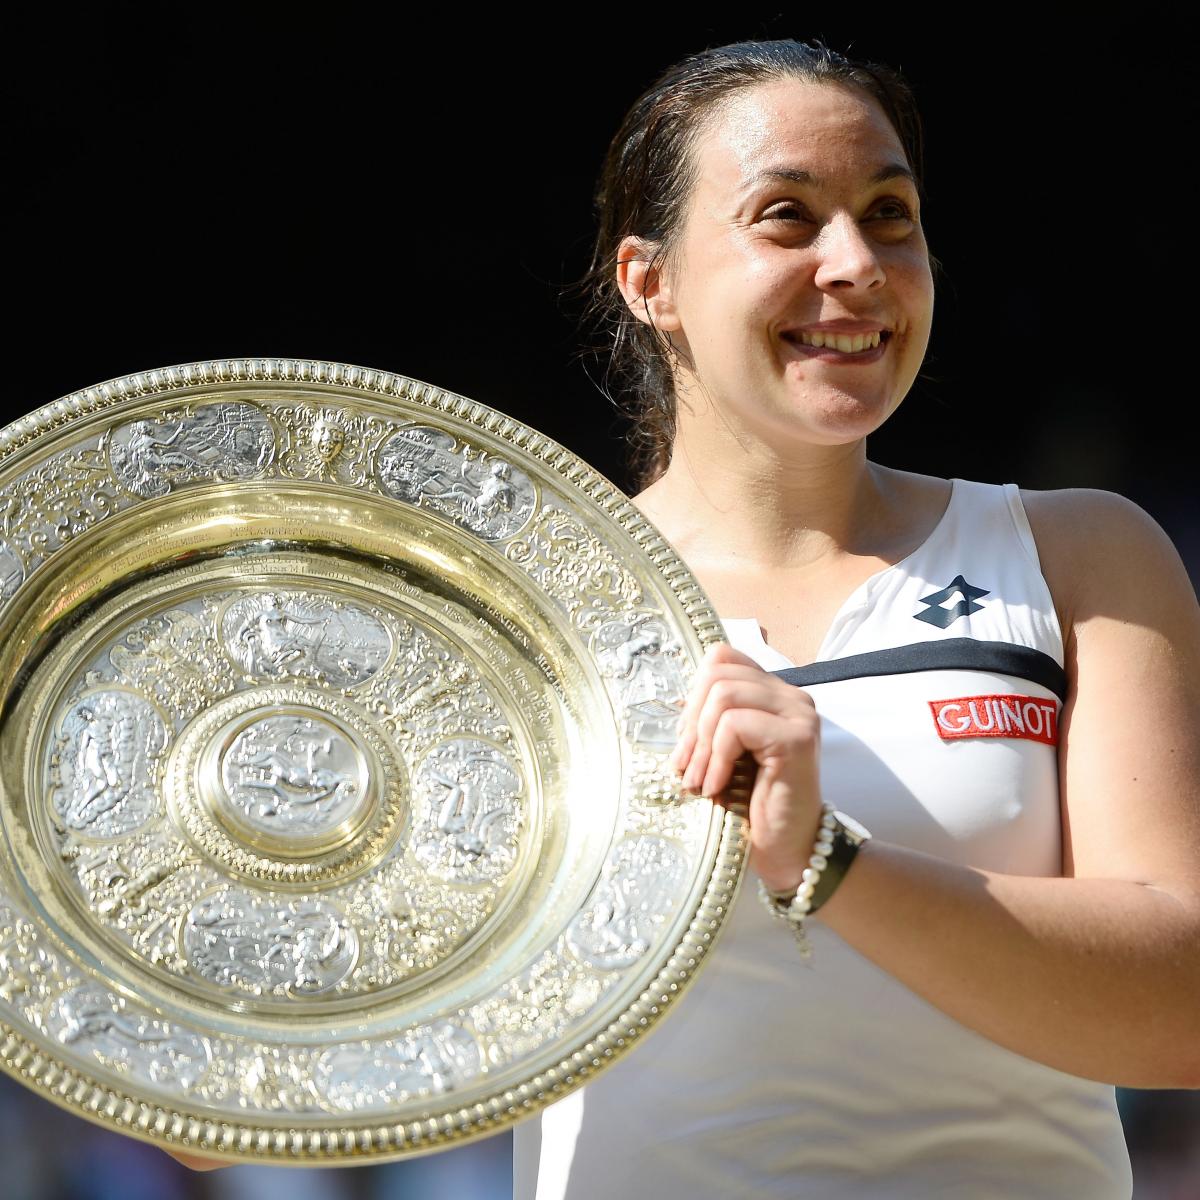 Wimbledon 2013 Results: How Marion Bartoli's Title Impacts ...